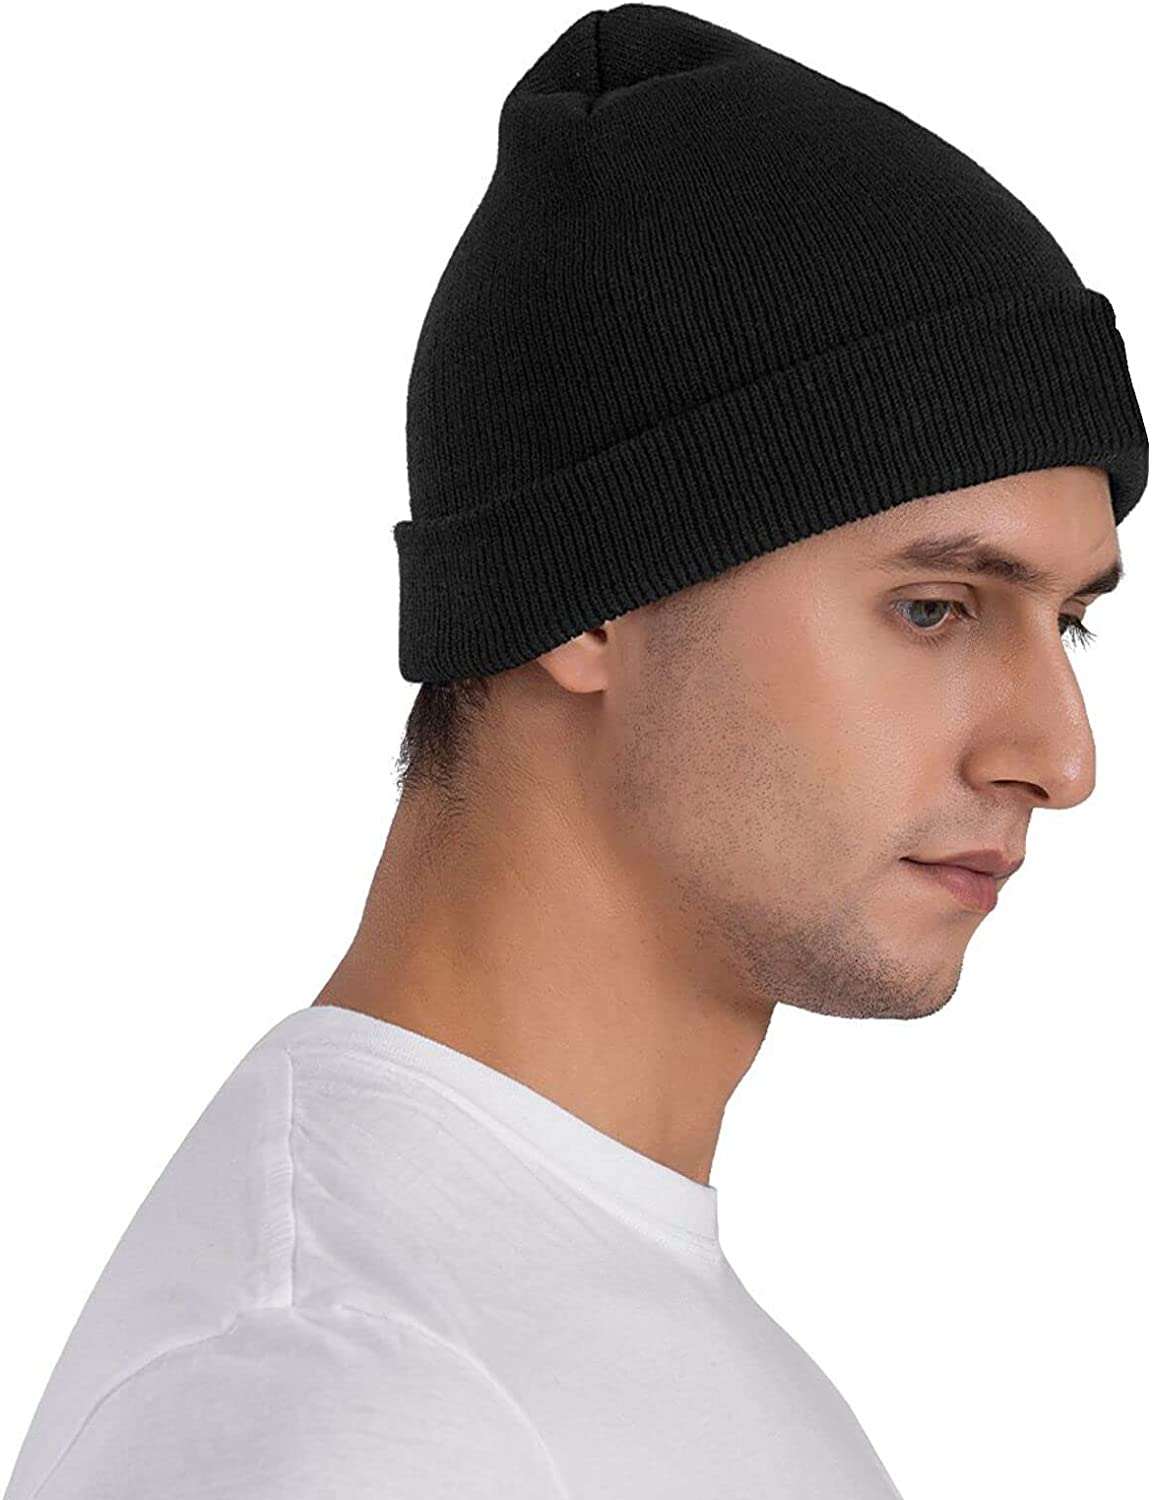 gogoherhome Suicide Logo Boys Knit Hats Cap Stretchy Beanie Weather for Women Embroidered Toboggan Soft for Cold Men Black Warm